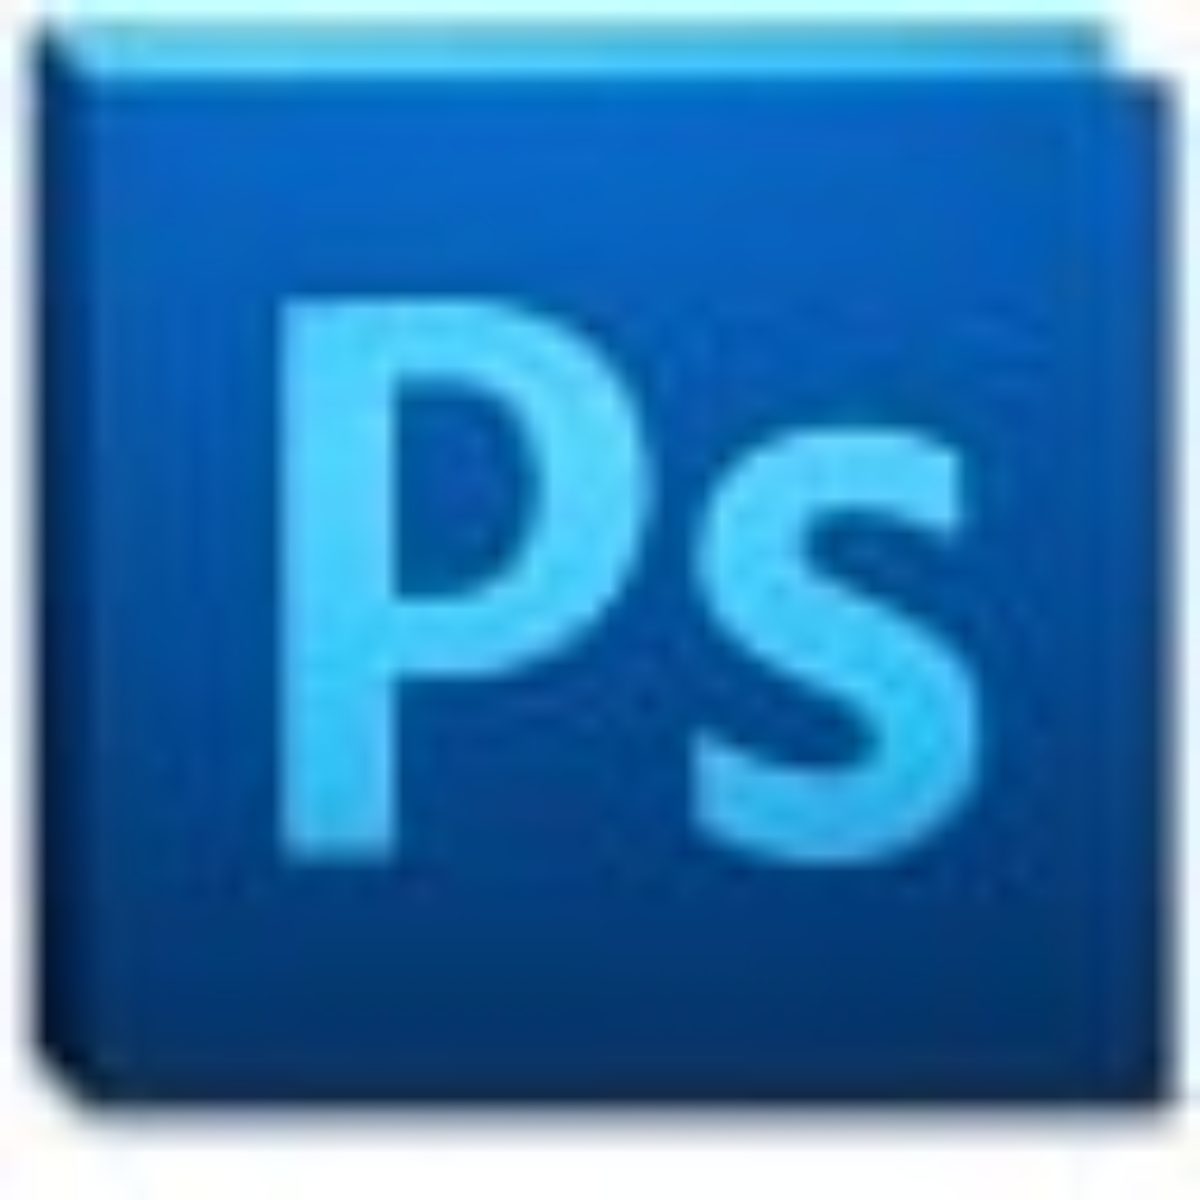 download photoshop cs5 free for mac